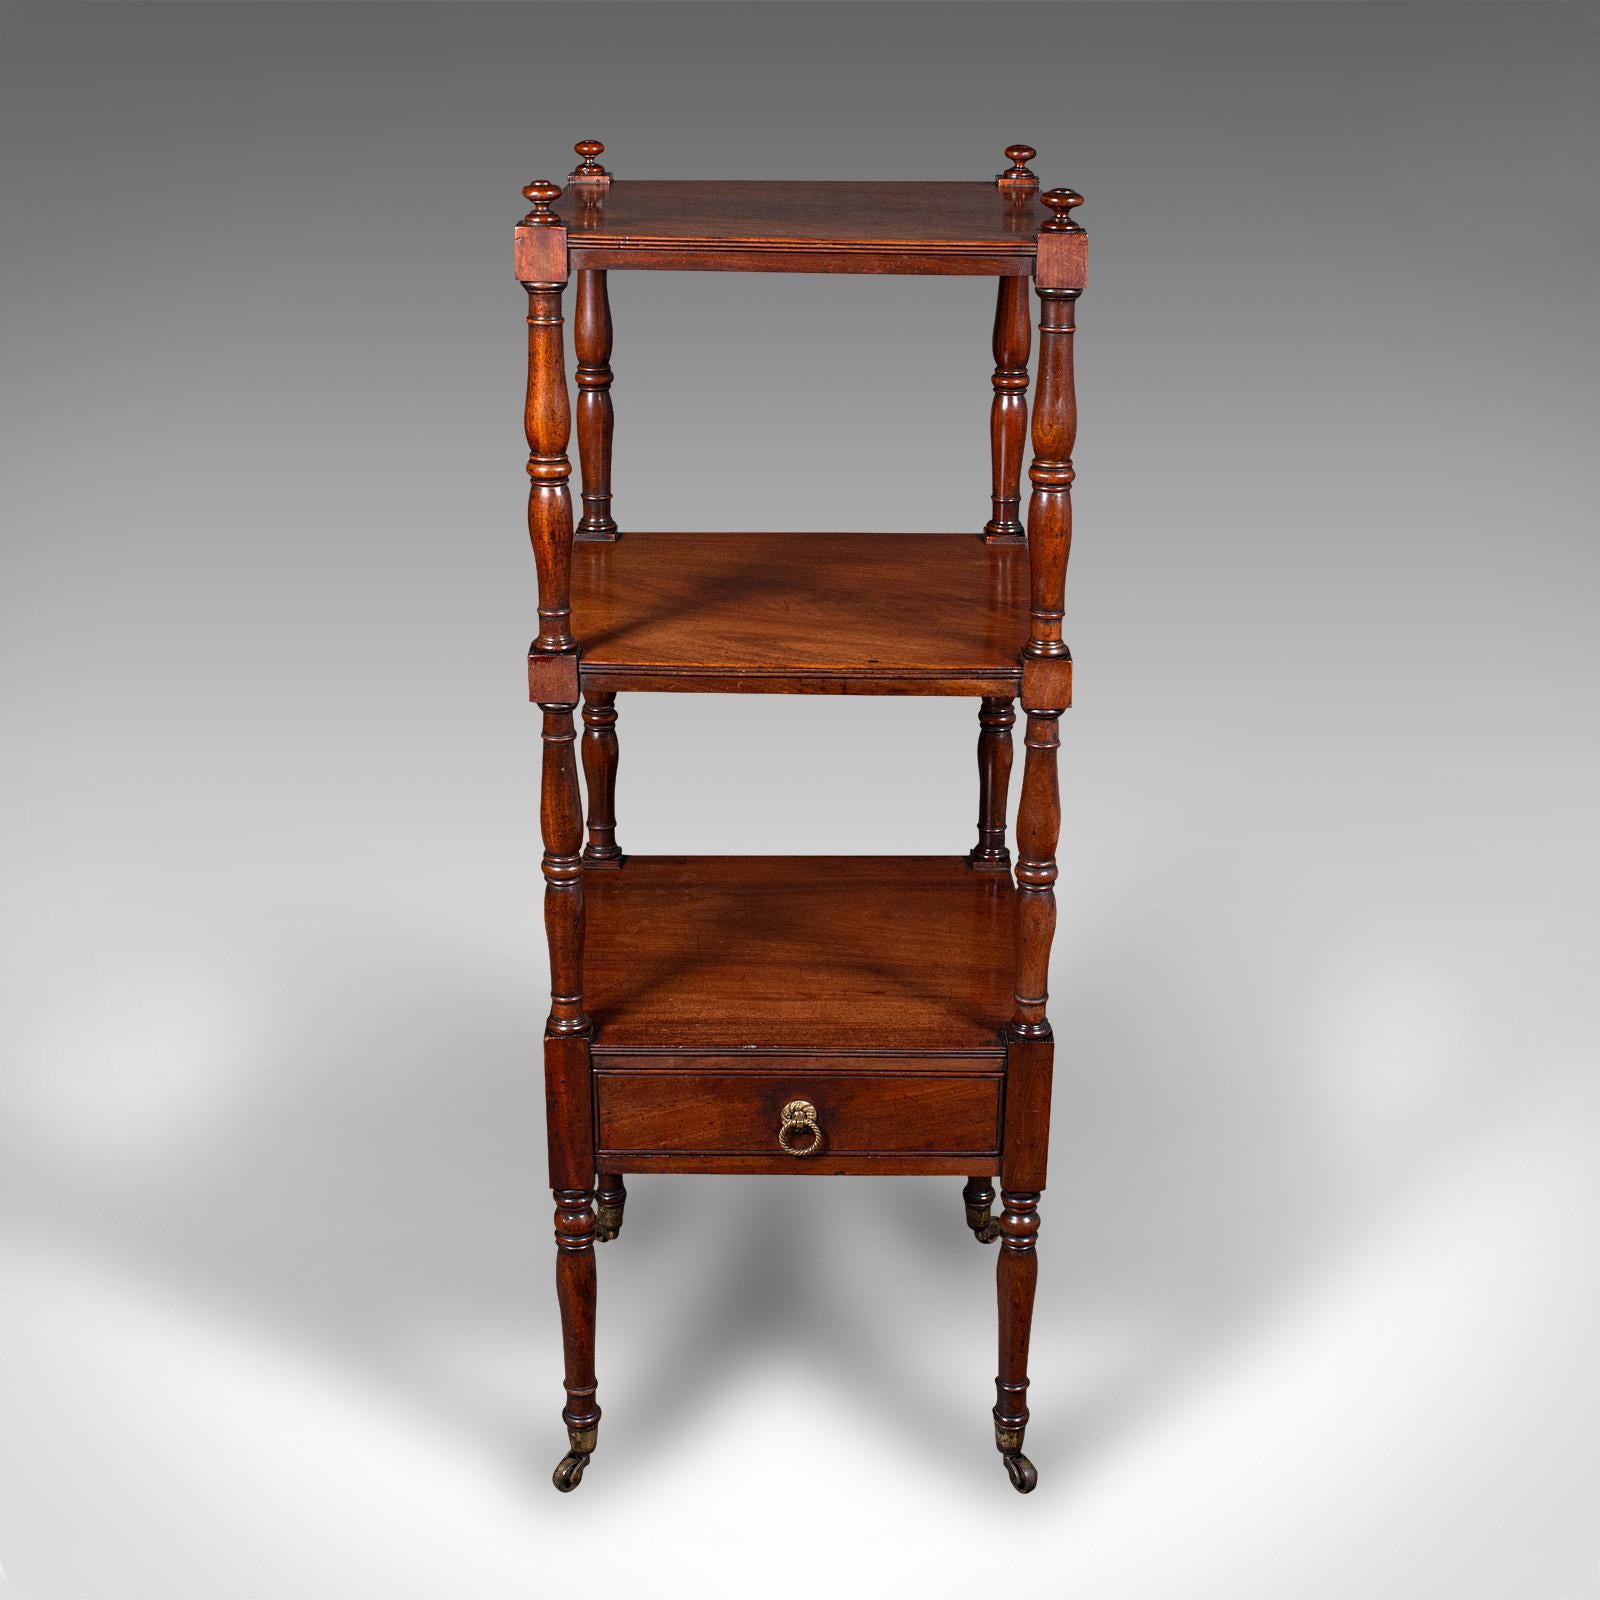 This is an antique 3 tier whatnot. An English, mahogany open display stand, dating to the Georgian period, circa 1800.

Attractive example of Georgian display furniture
Displays a desirable aged patina and in good order
Select stocks show rich